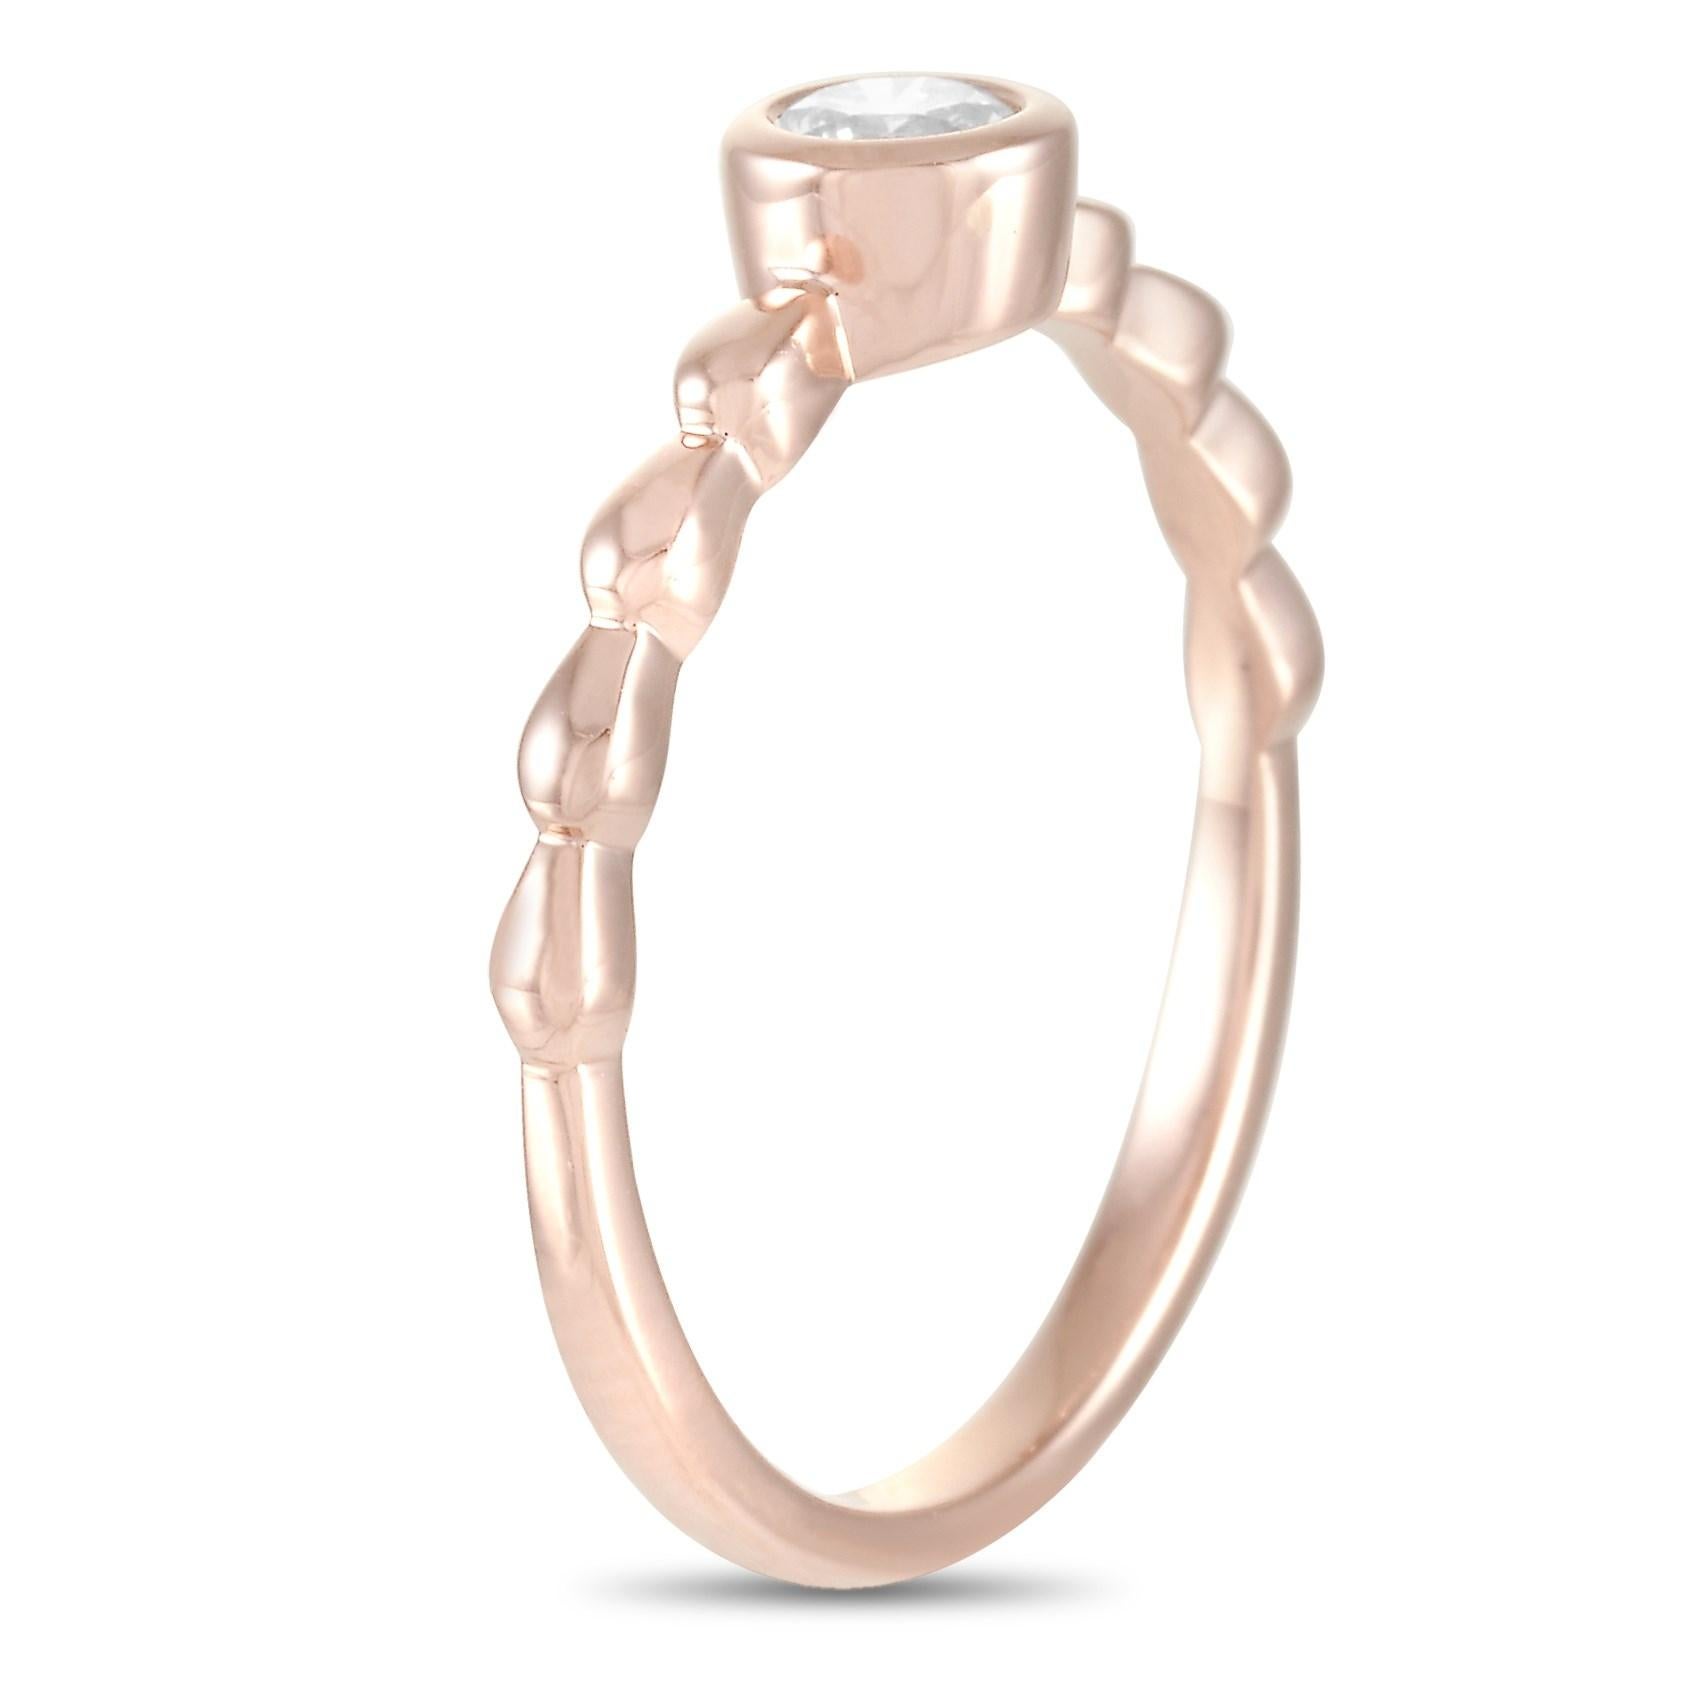 This LB Exclusive ring is made of 14K rose gold and embellished with a 0.25 ct diamond stone. The ring weighs 1.9 grams and boasts a band thickness of 1 mm and a top height of 4 mm, while top dimensions measure 5 by 5 mm.

Offered in brand-new